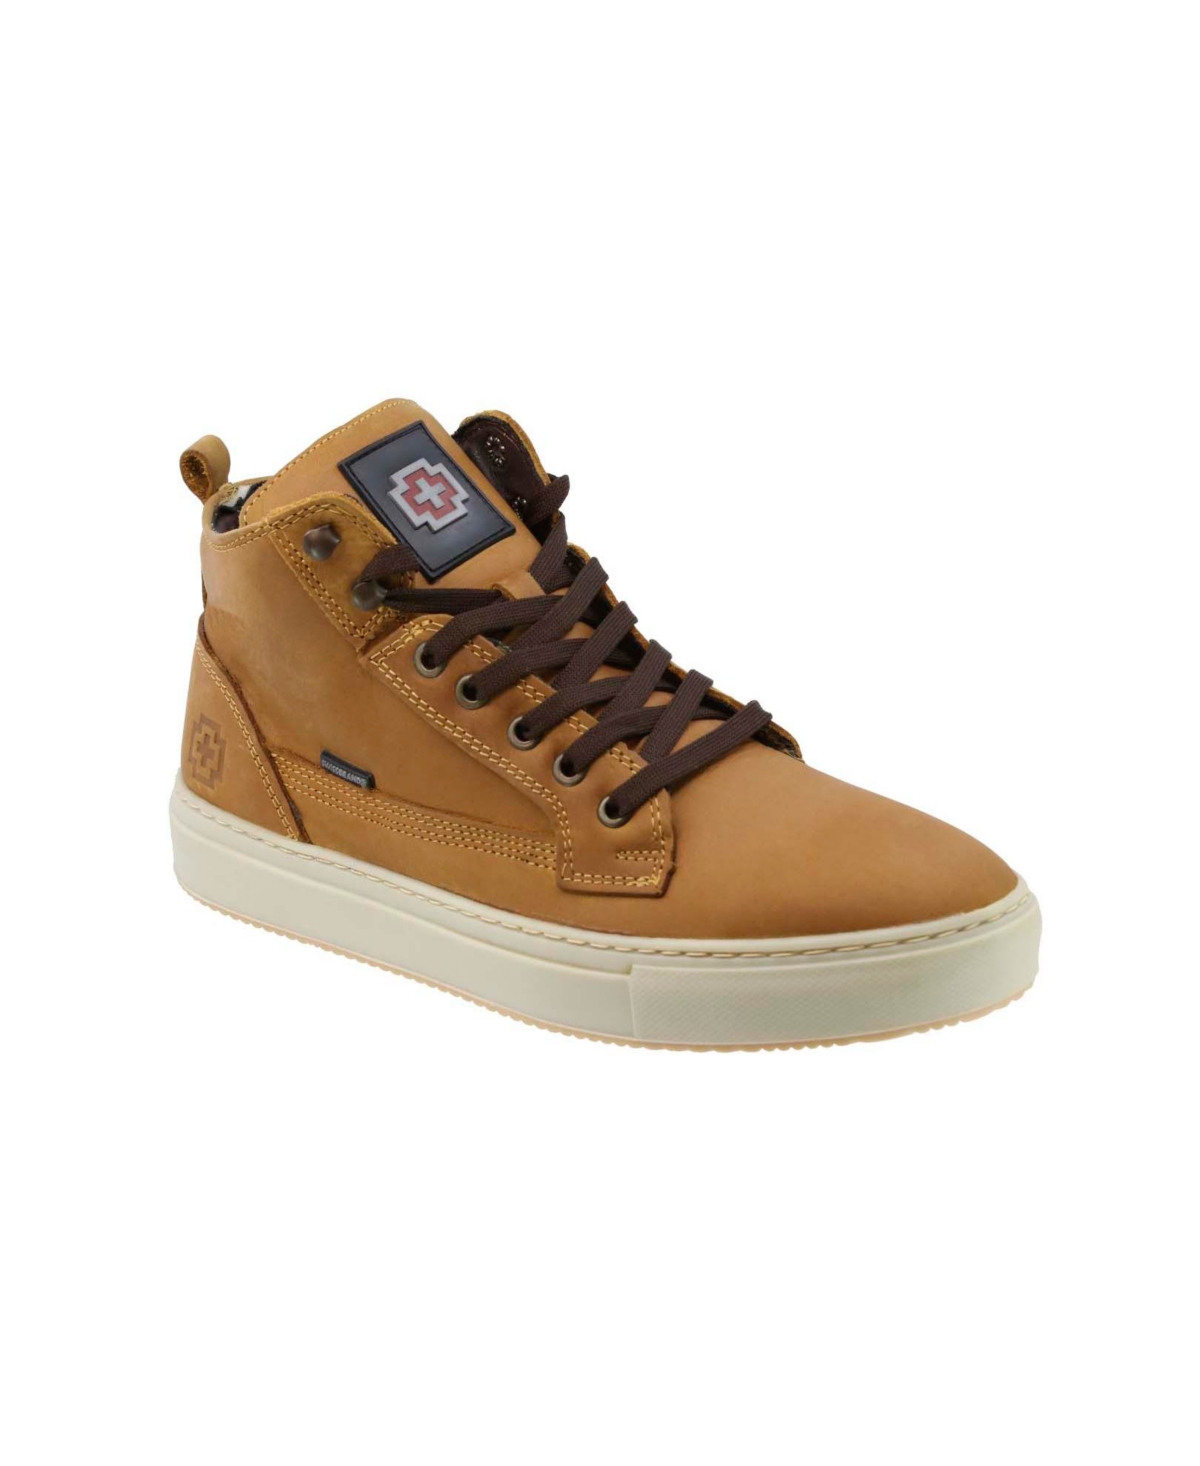 Leather High-Top Sneakers By Swissbrand - Honey